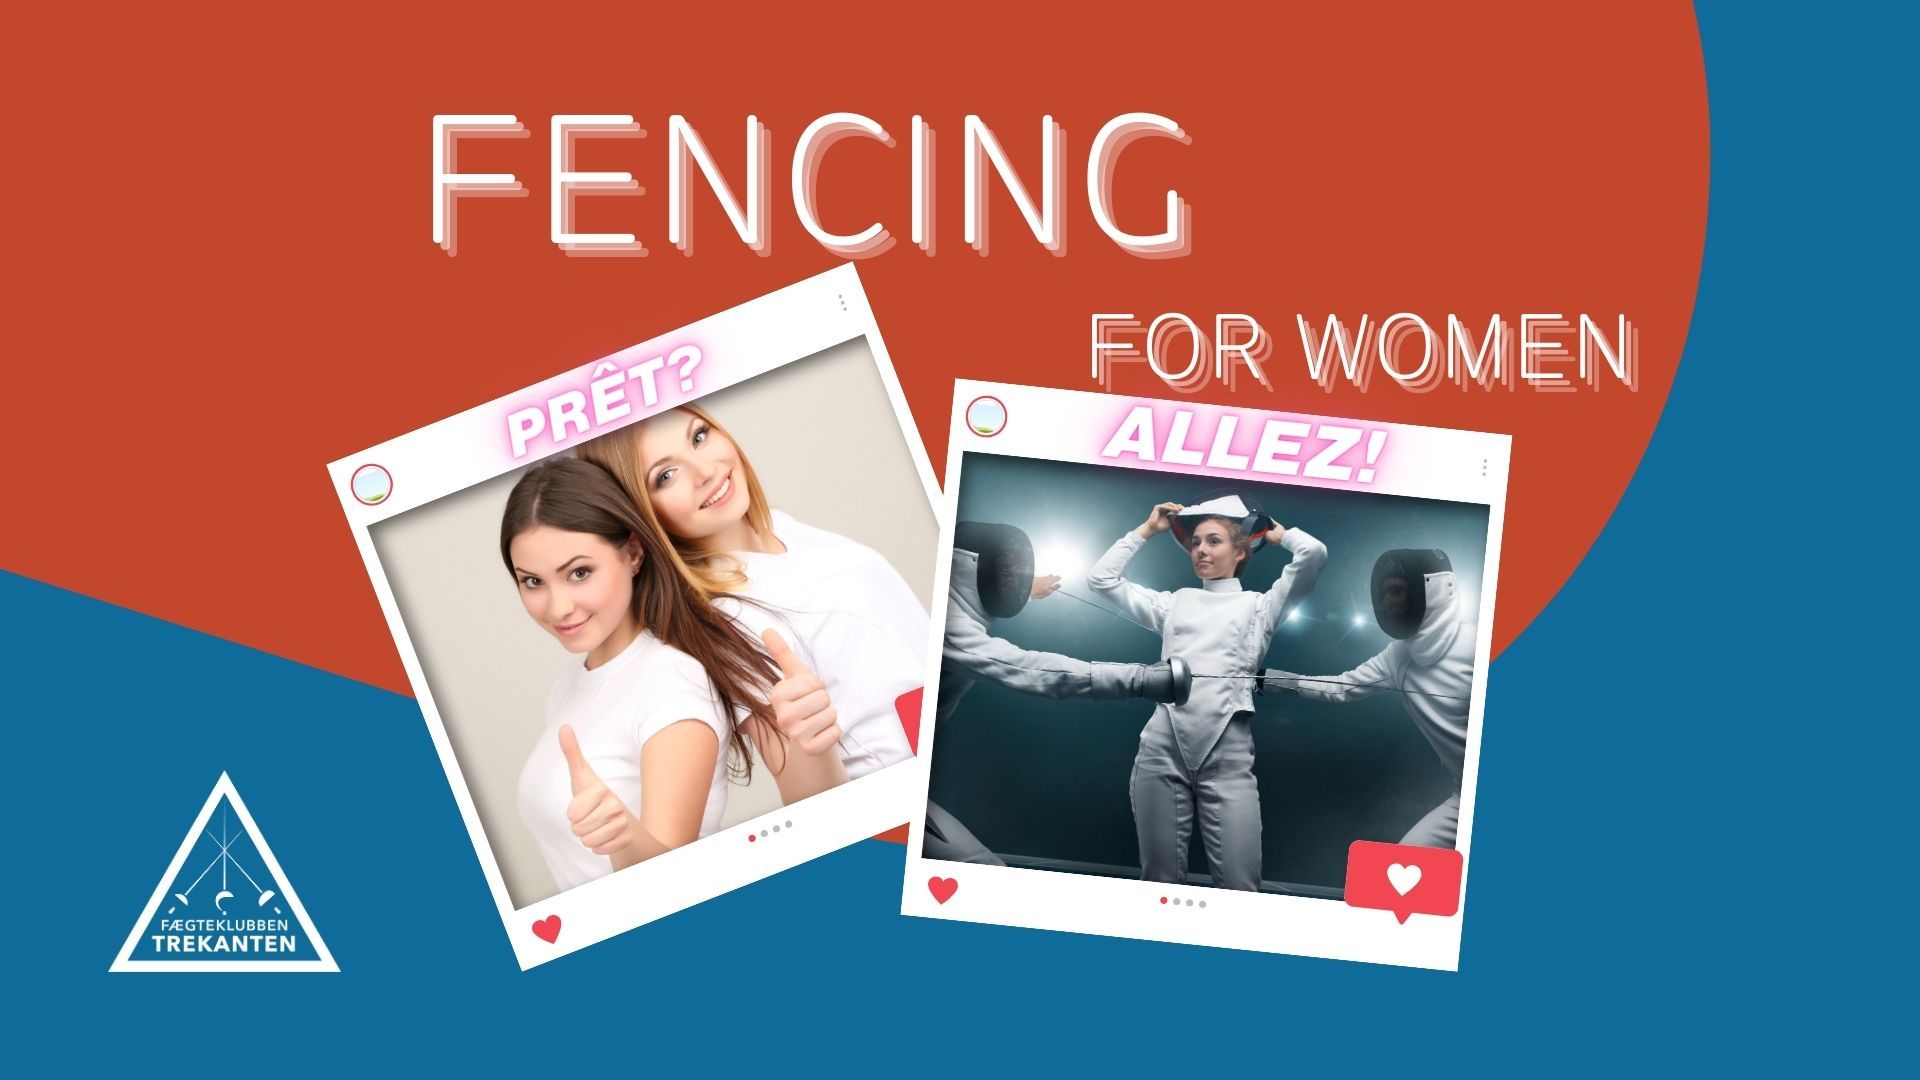 Fencing for women